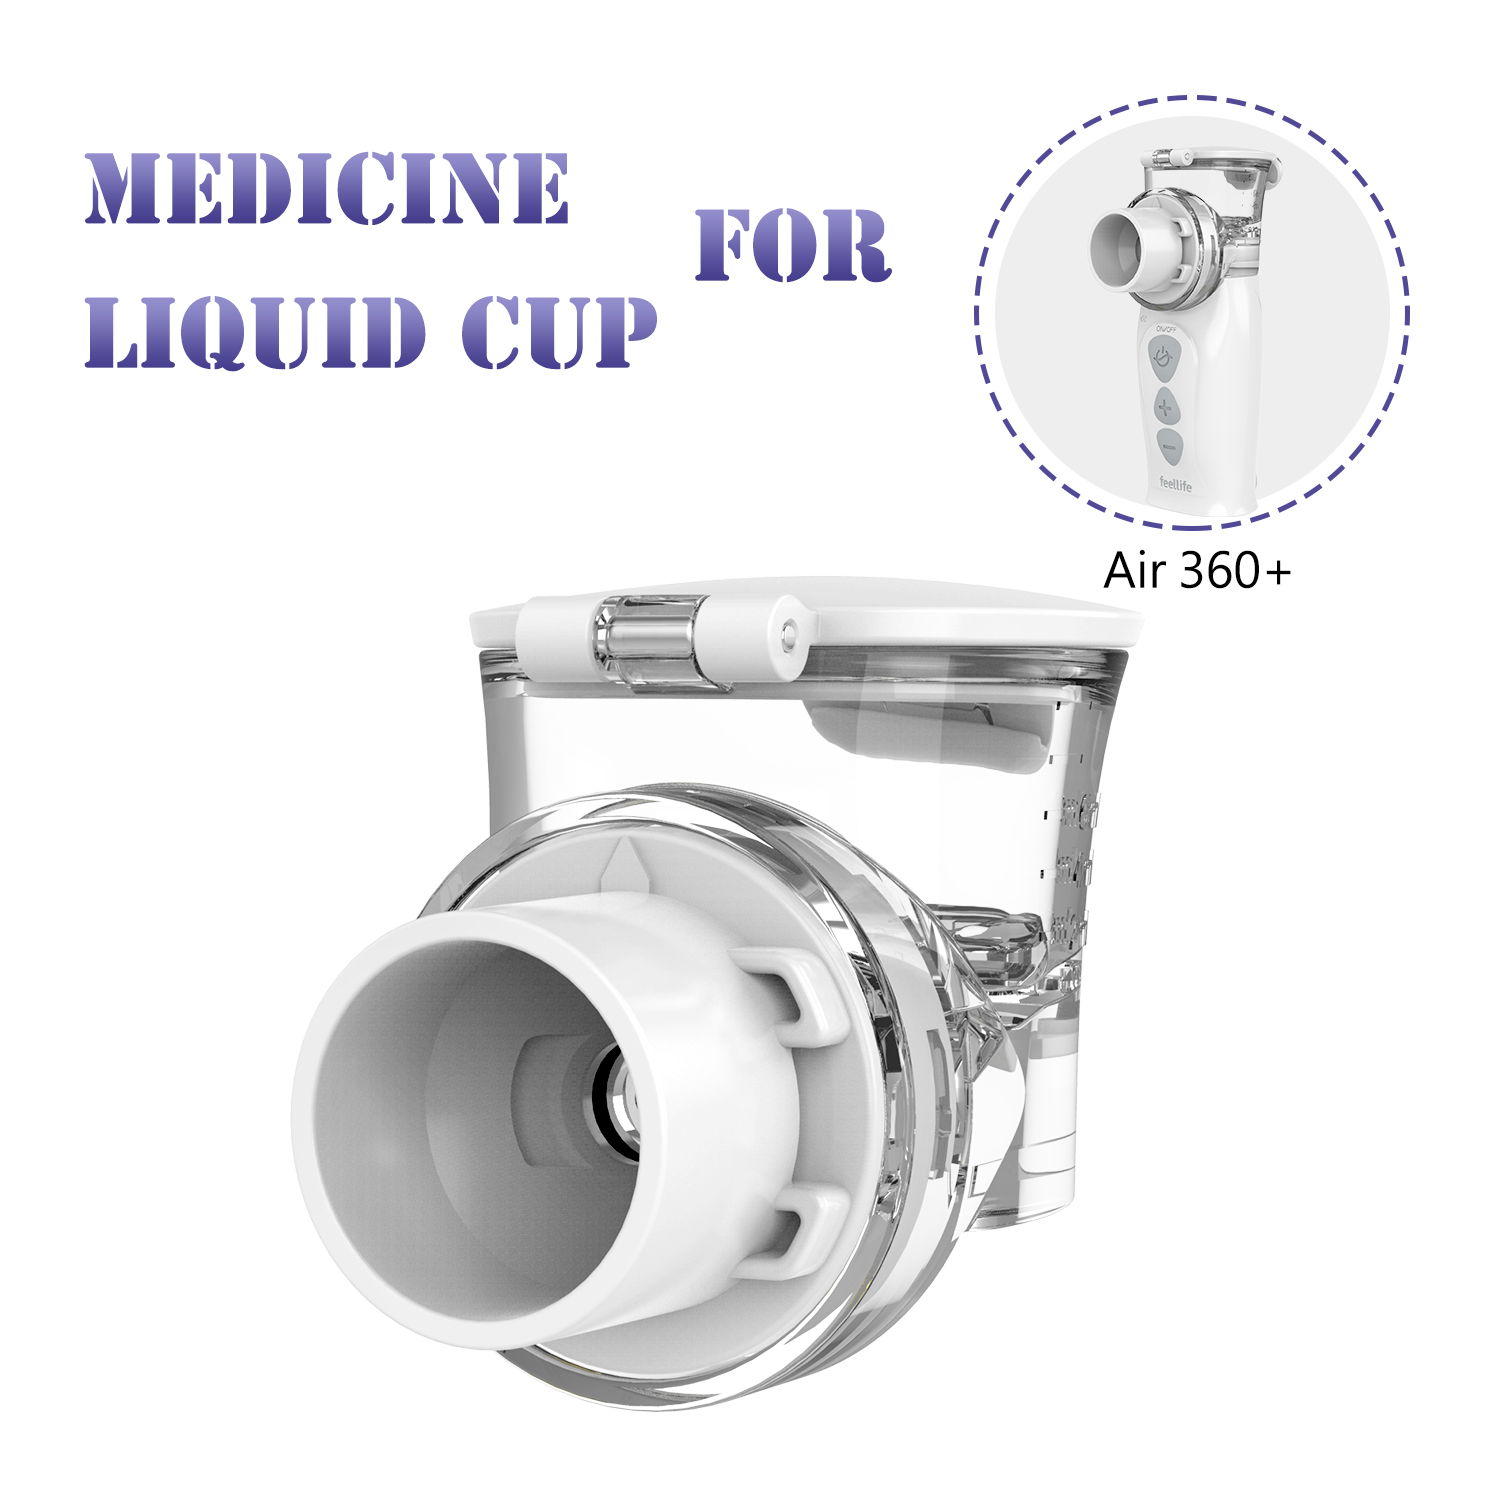 Portable Mesh Nebulizer Air 360+ Liquid Cup Medication Cup